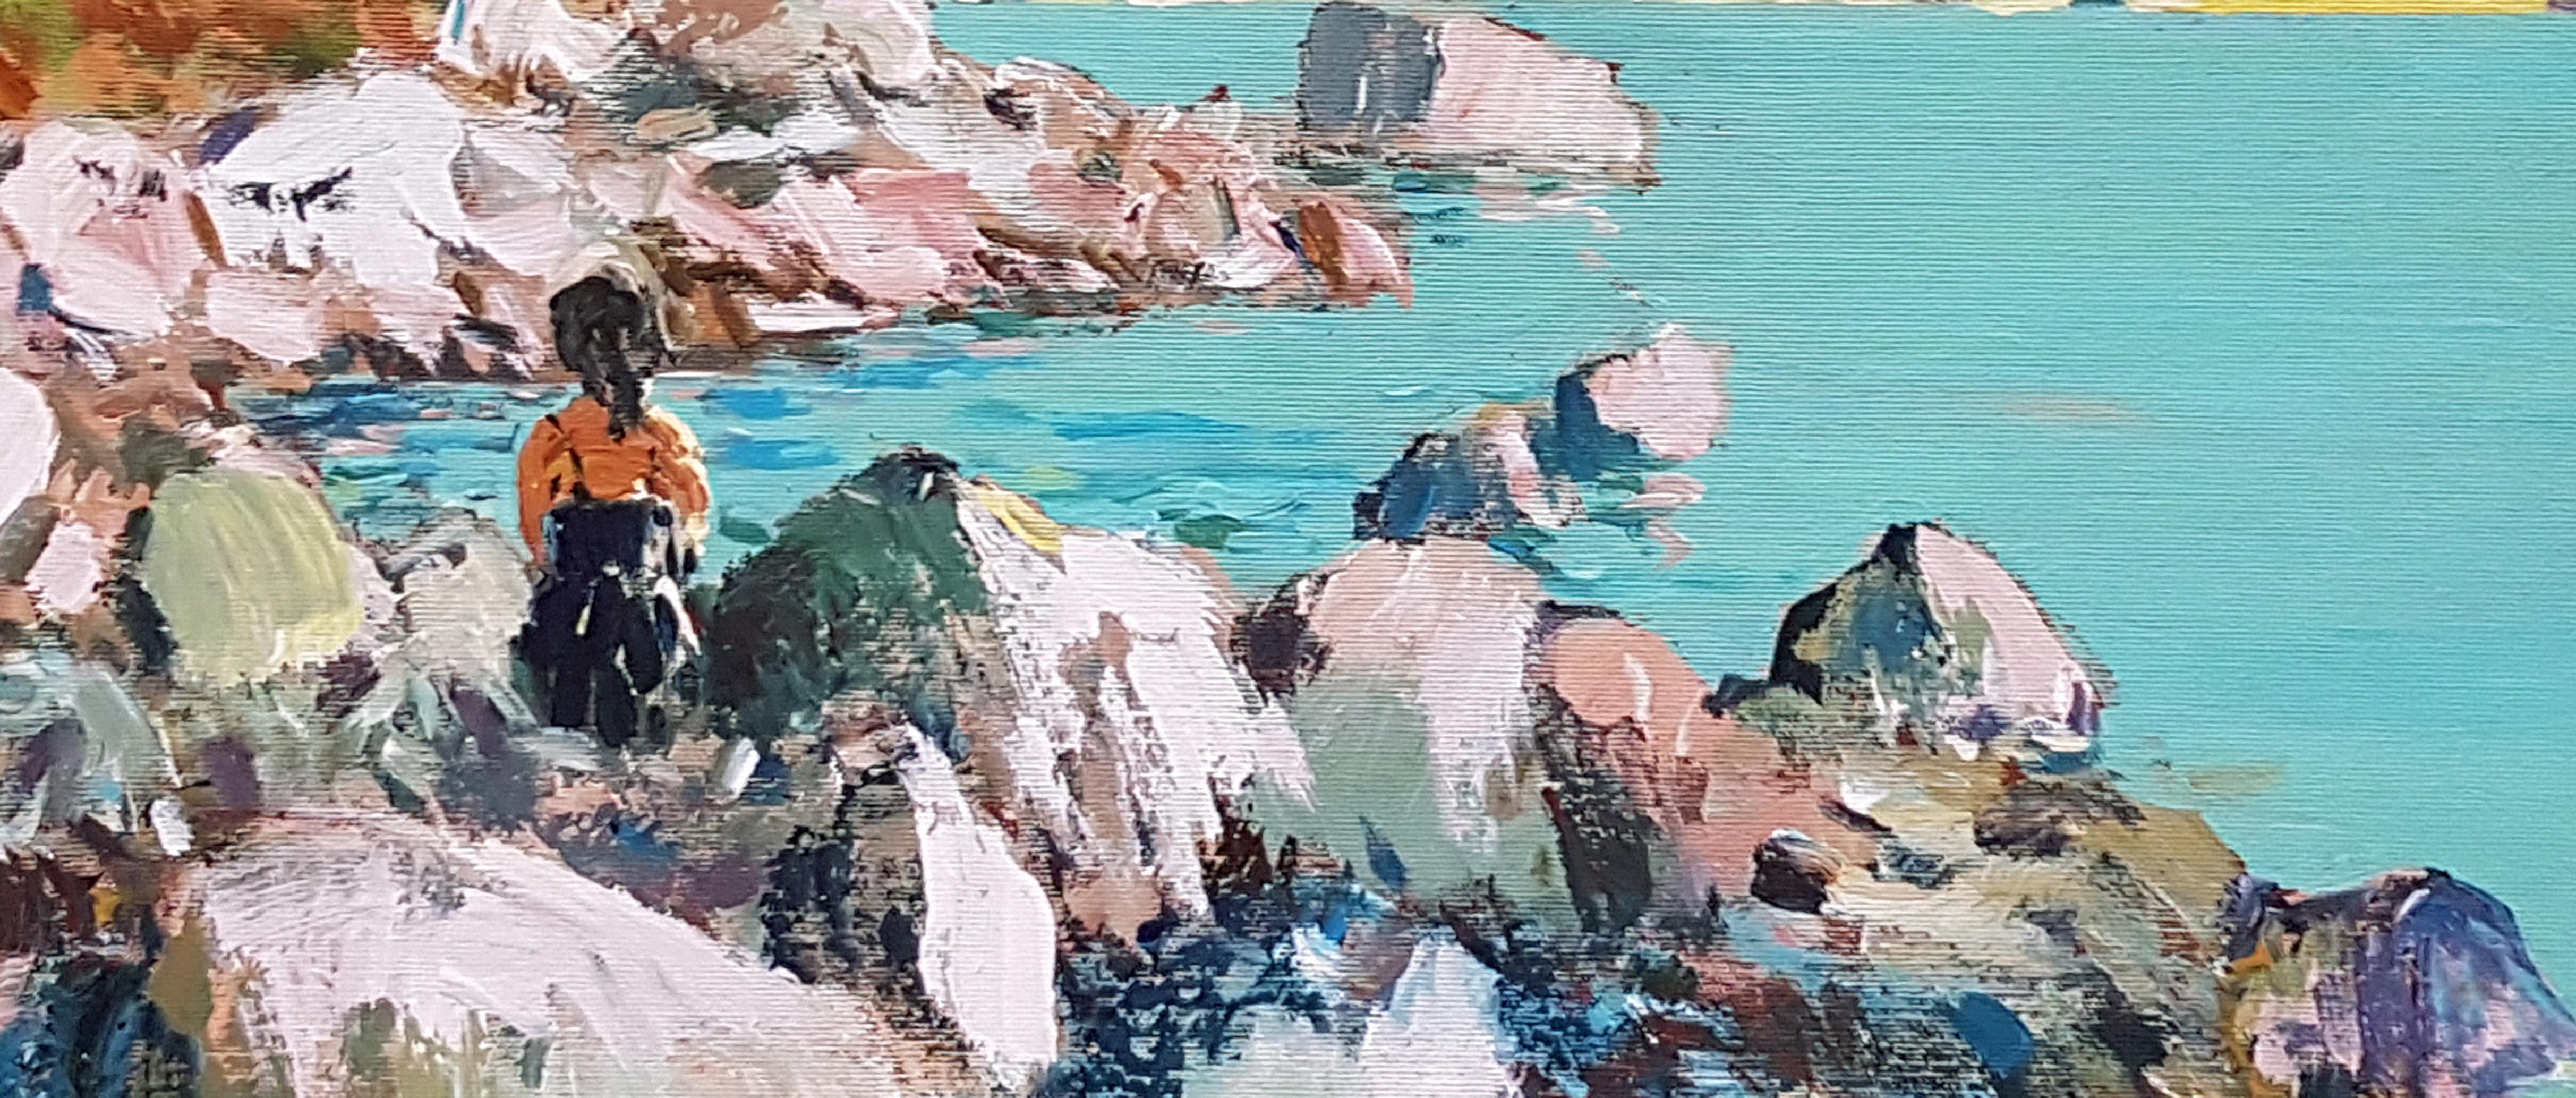 Stony Beach, Cliffs, Impressionism Original Painting, One of a Kind - Brown Figurative Painting by Ara H. Hakobyan